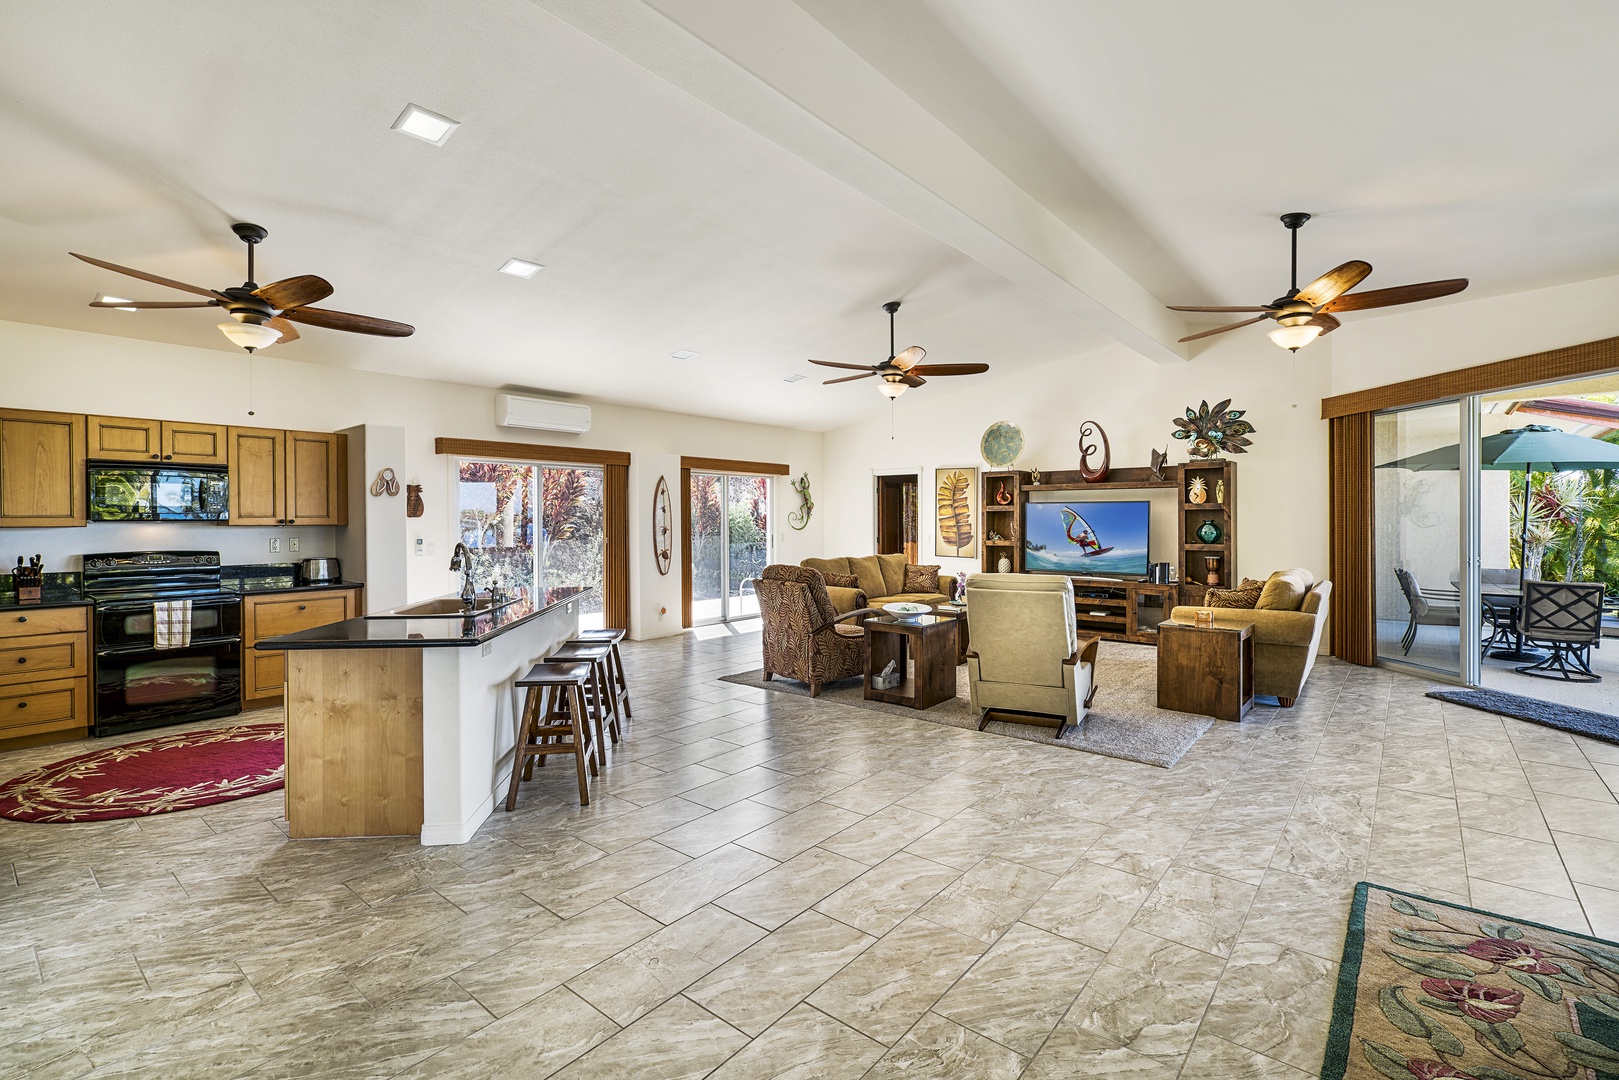 Kailua Kona Vacation Rentals, Maile Hale - Tiled floors throughout the main spaces